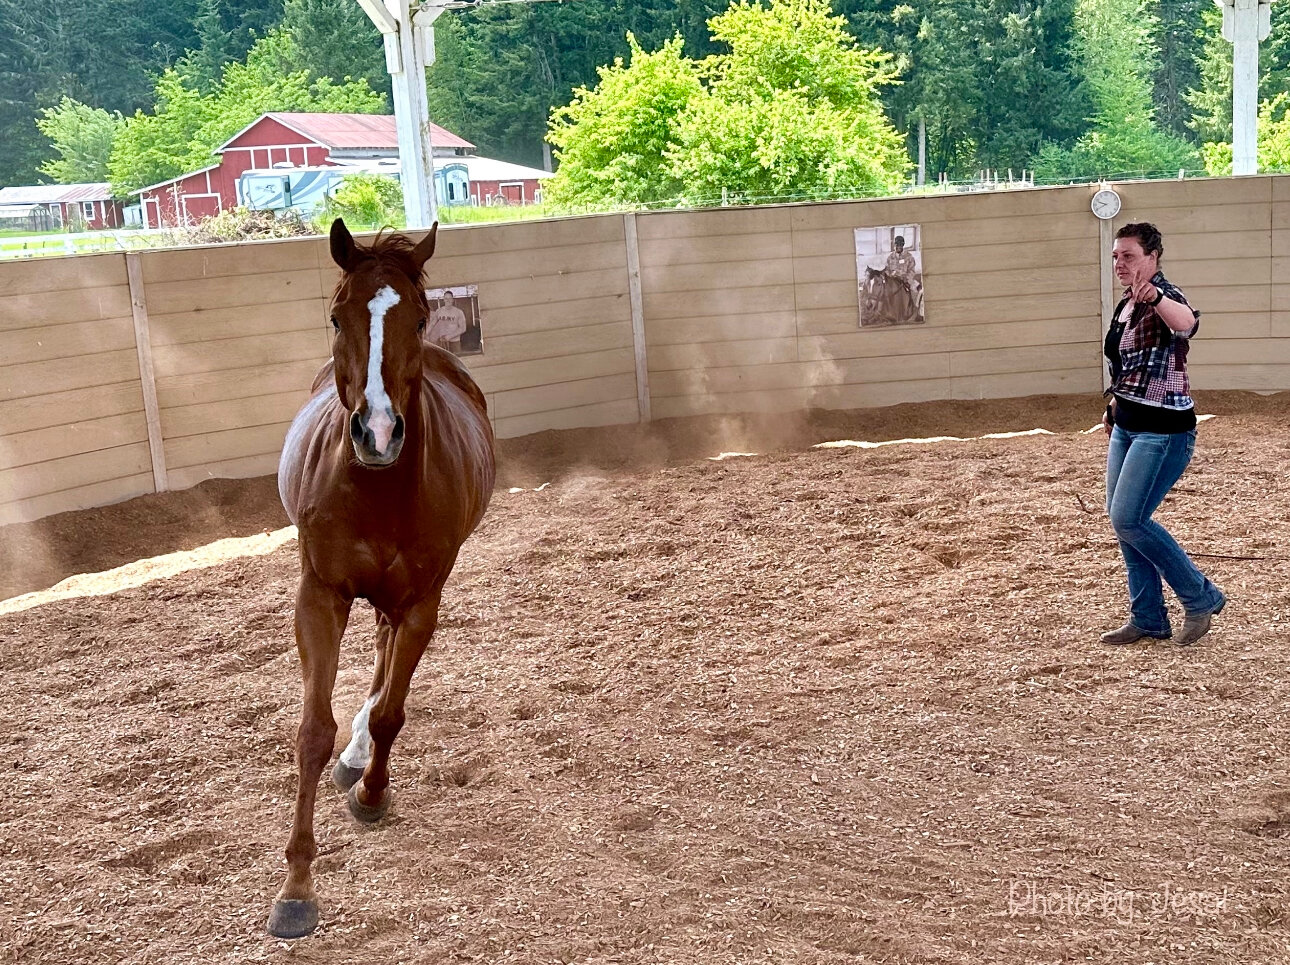 Caitlin Salvestrin demonstrates round penning with Copper. In this amazing interaction, the human instructs the horse simply with voice and subtle body movements to stop, start, change directions, go fast or slow, May 24, 2023.